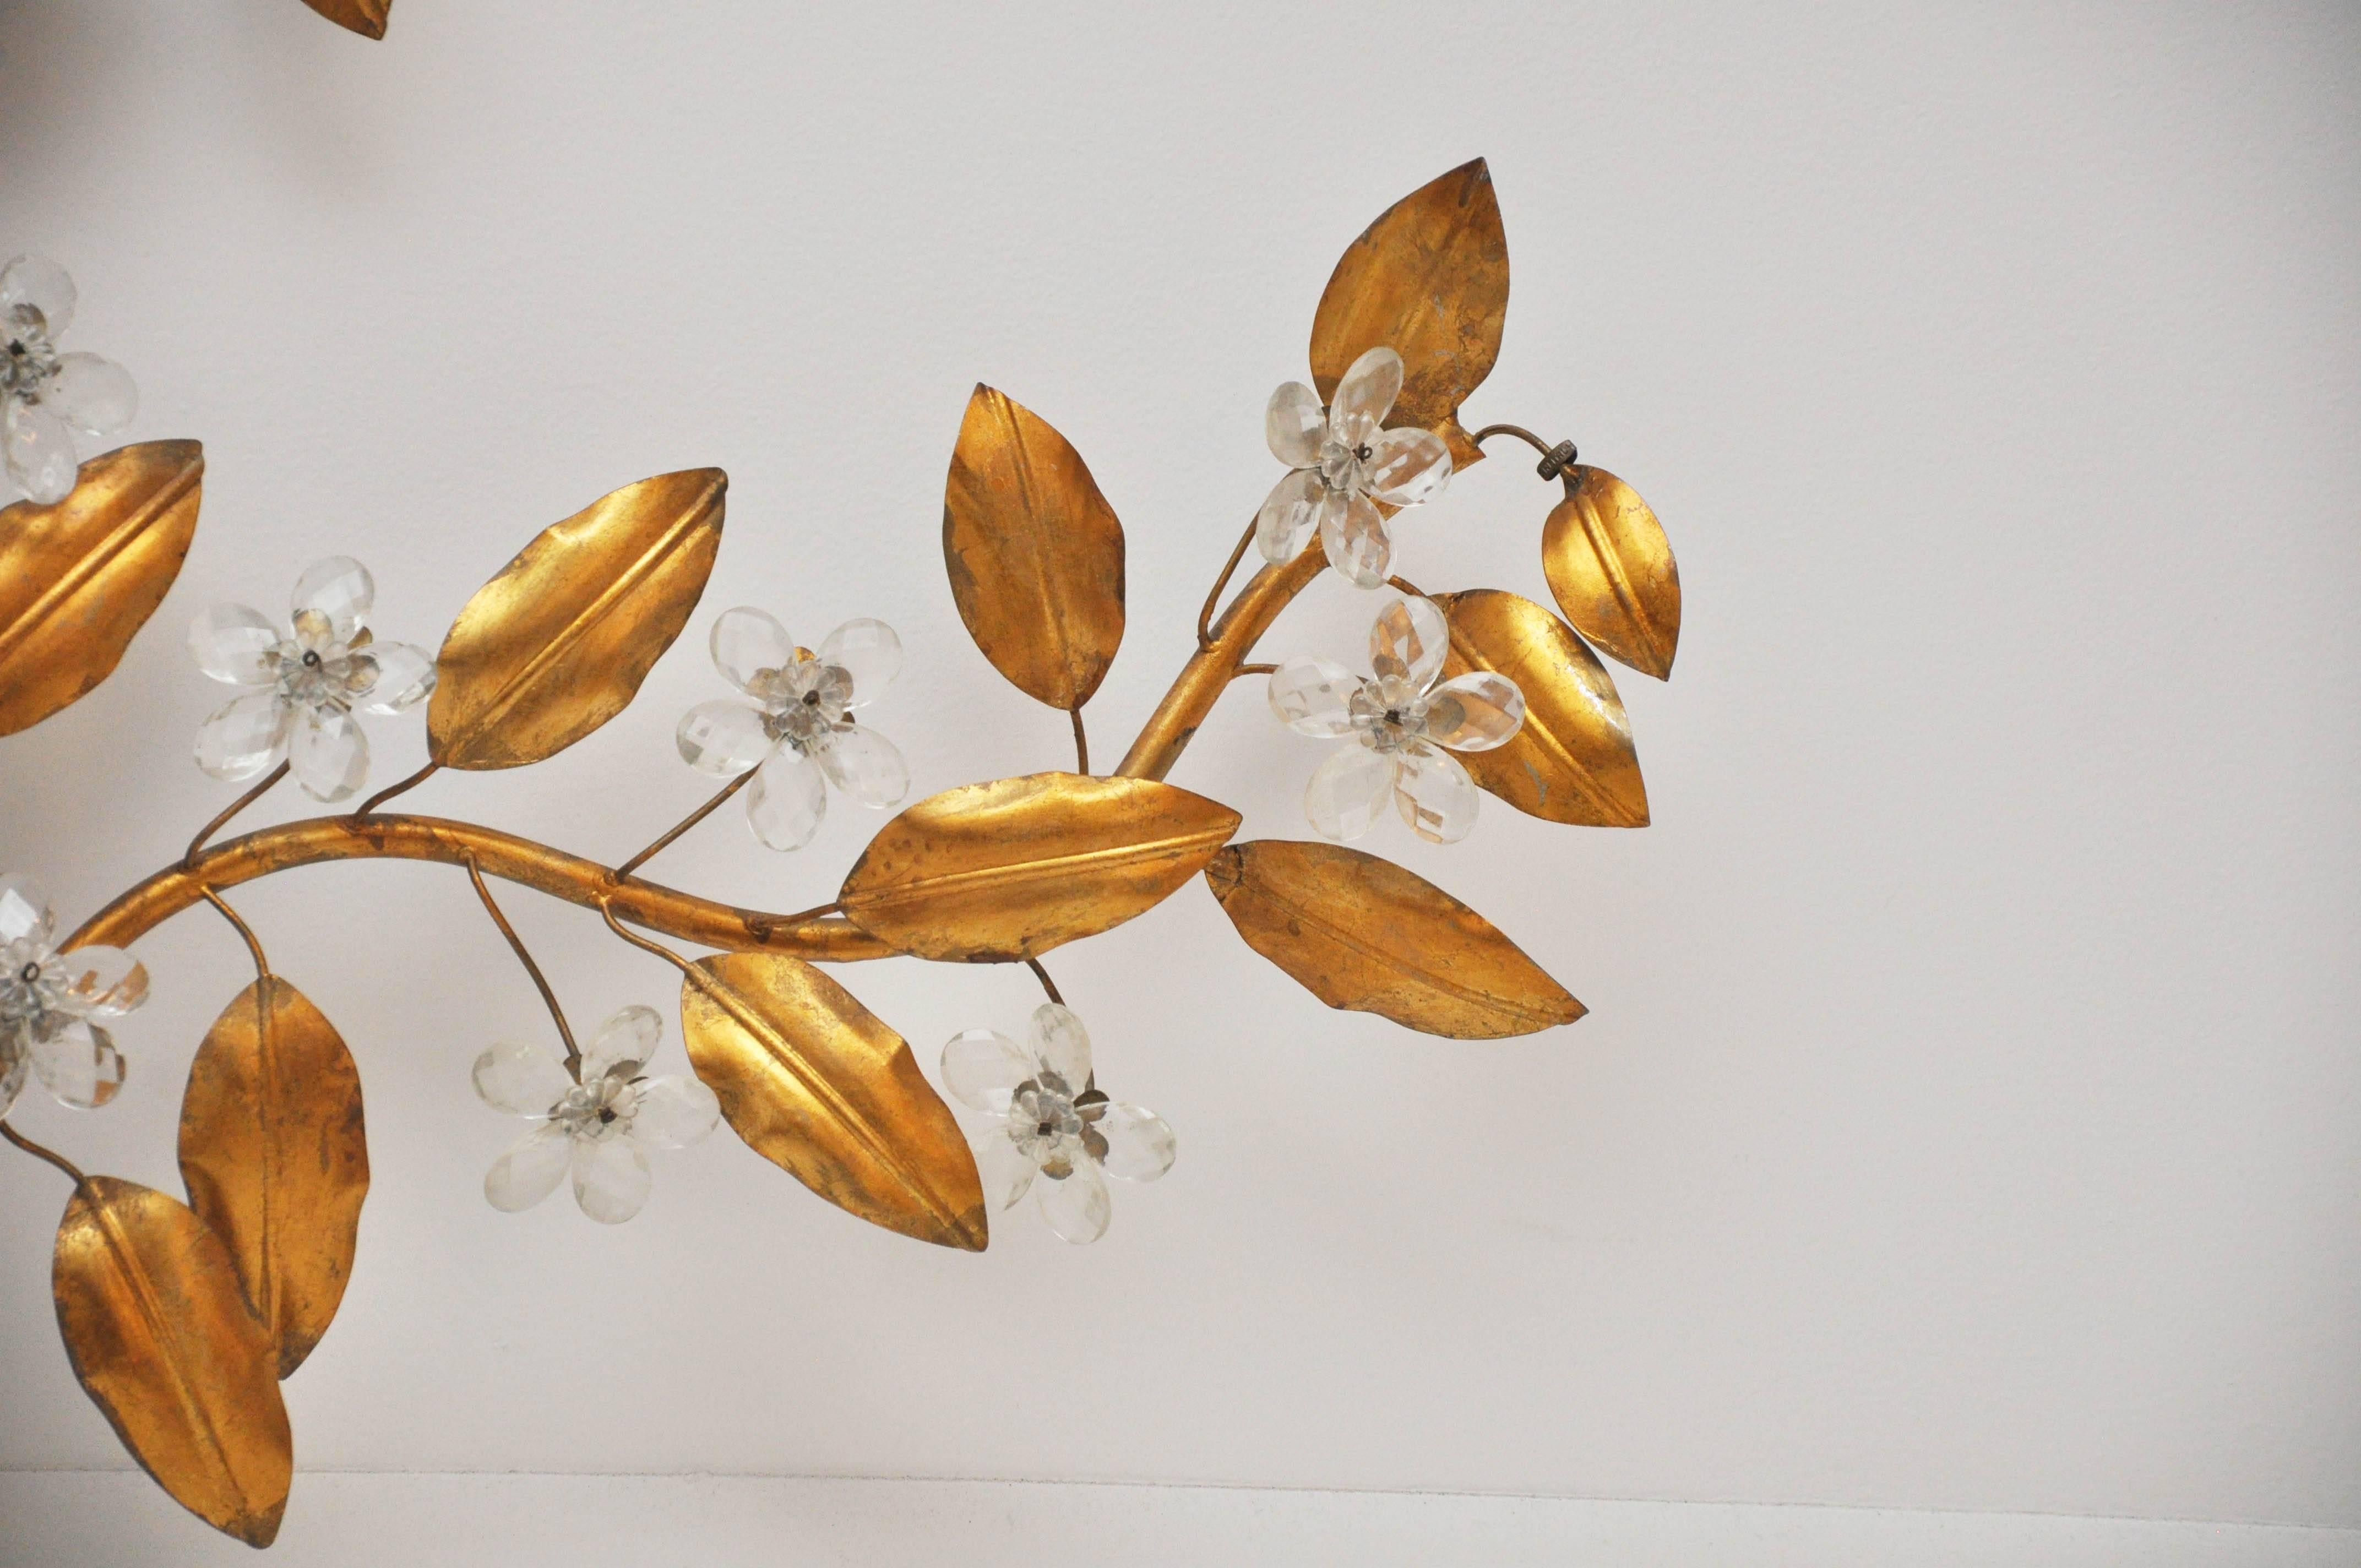 A sculptural work of art! Adds beauty and depth to the walls with beautiful gold leaves and crystal flowers. 